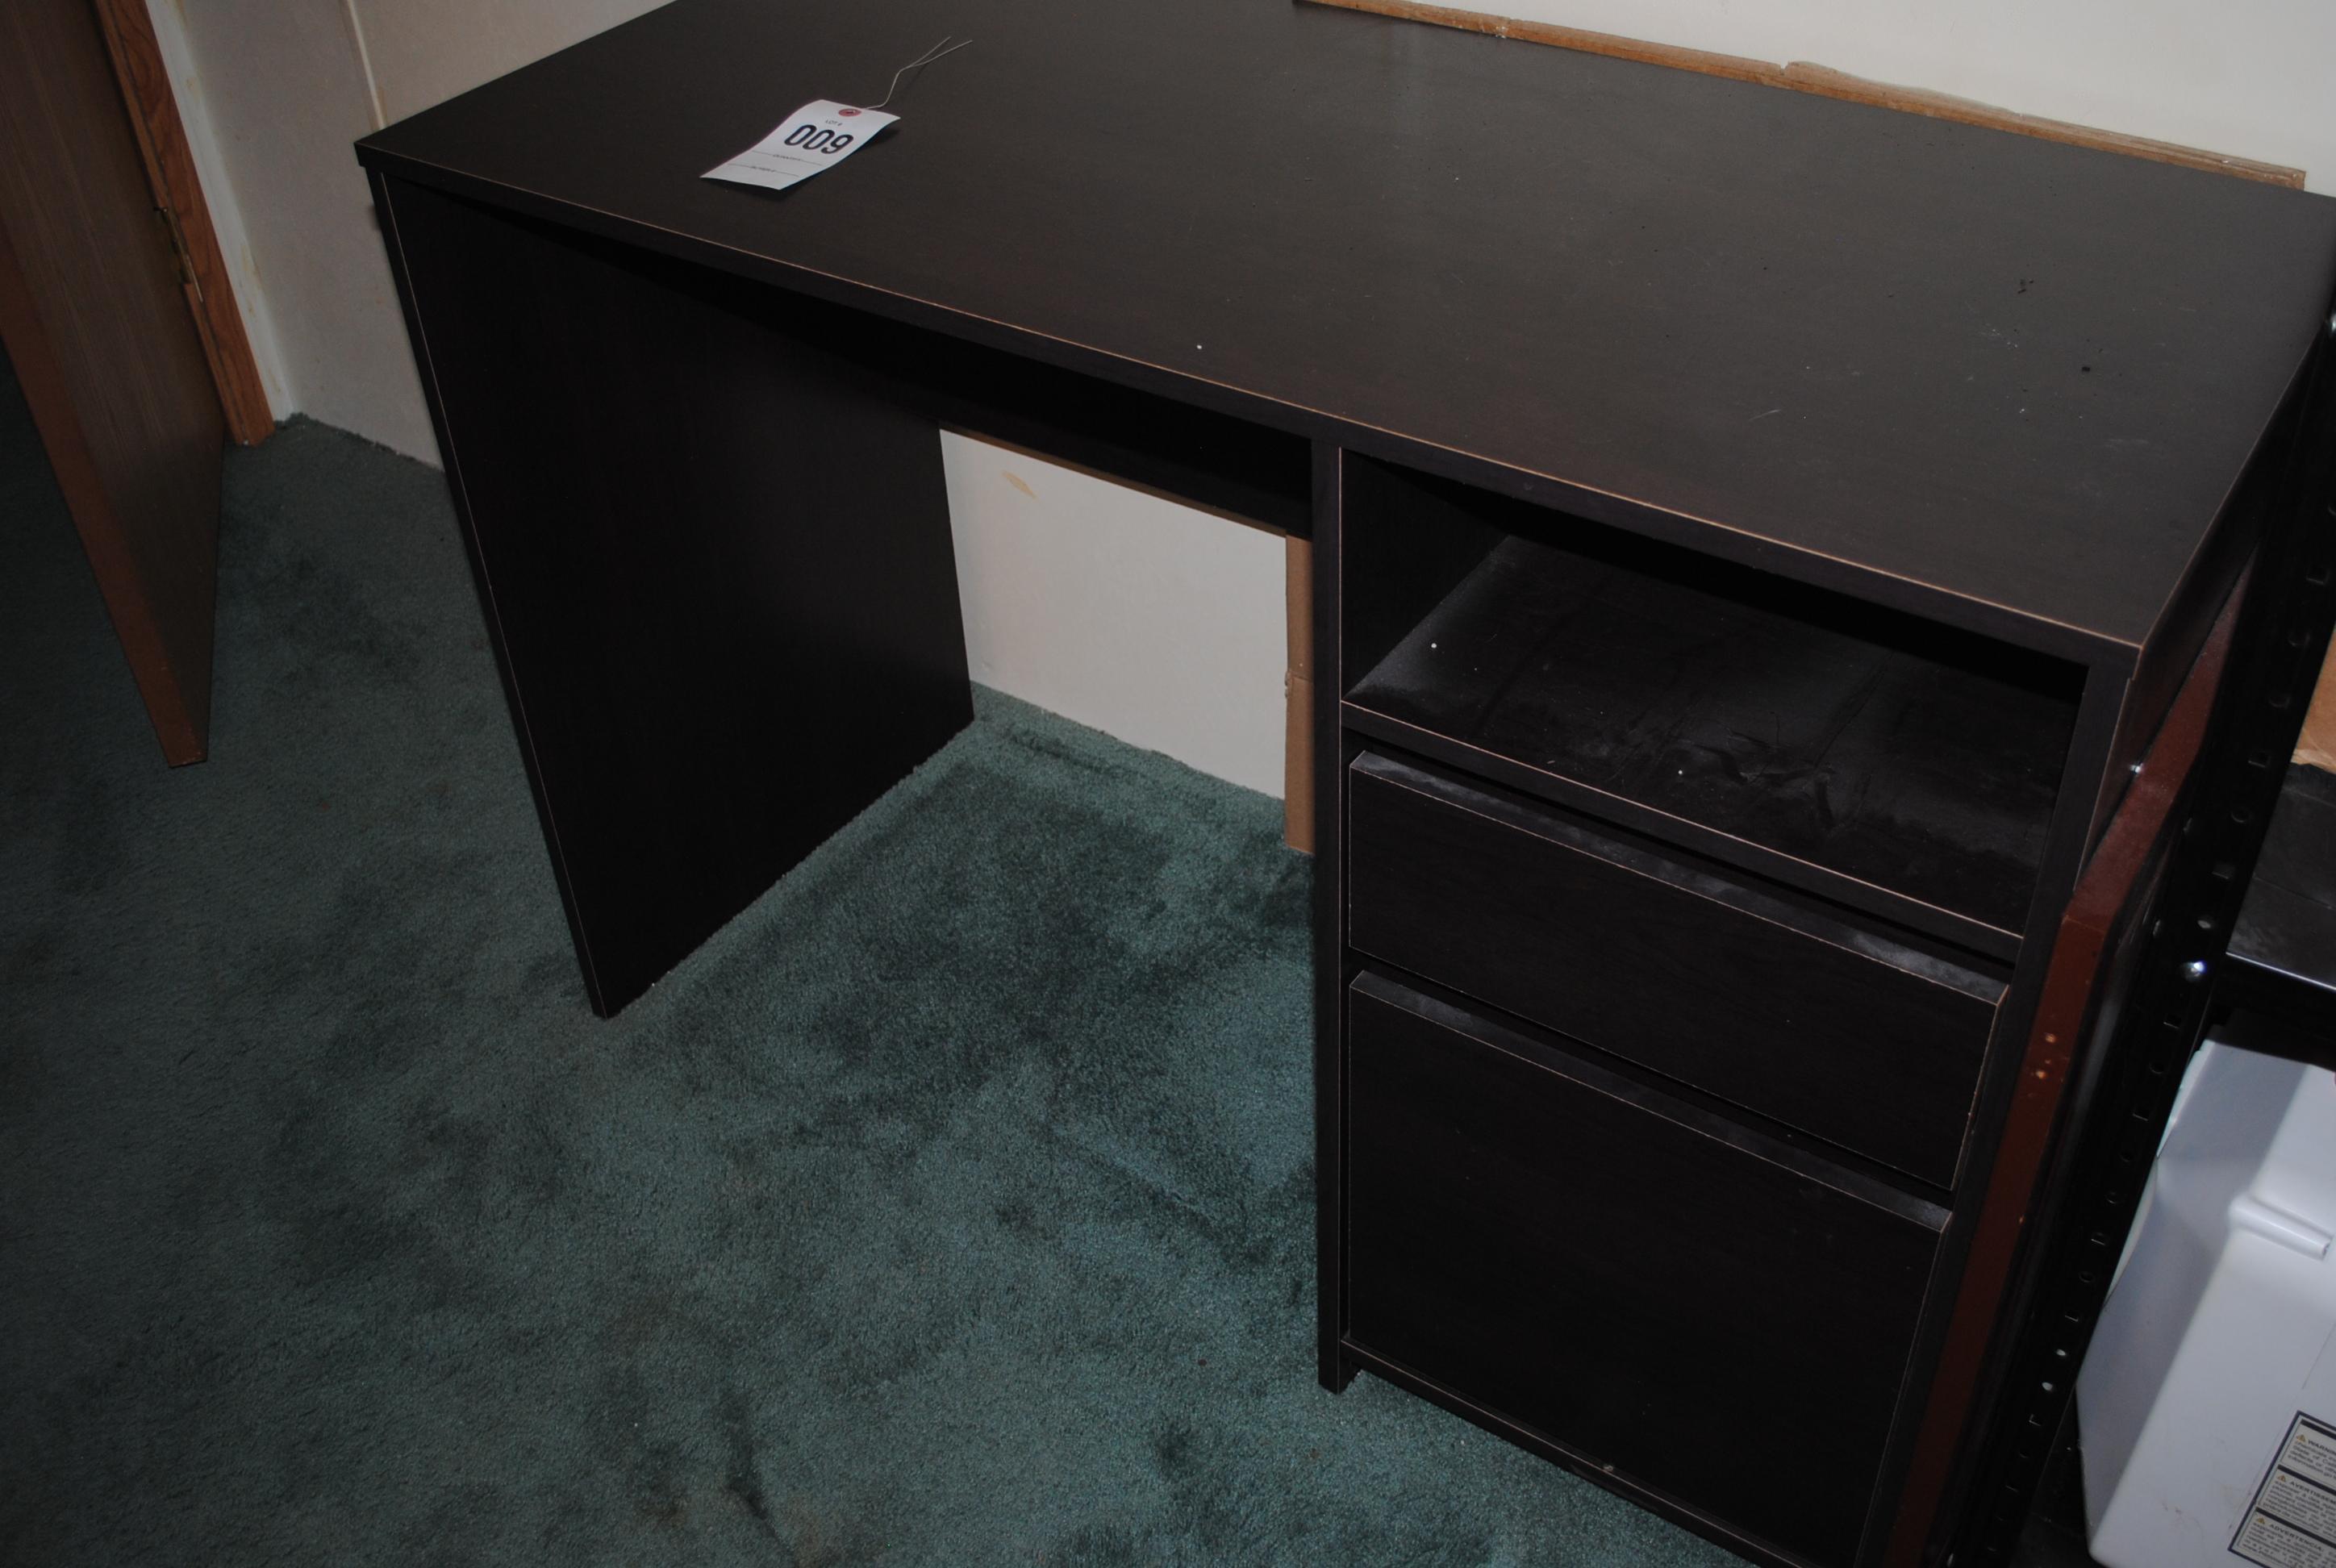 Black desk approx. 43" wide by 19" deep by 30" tall